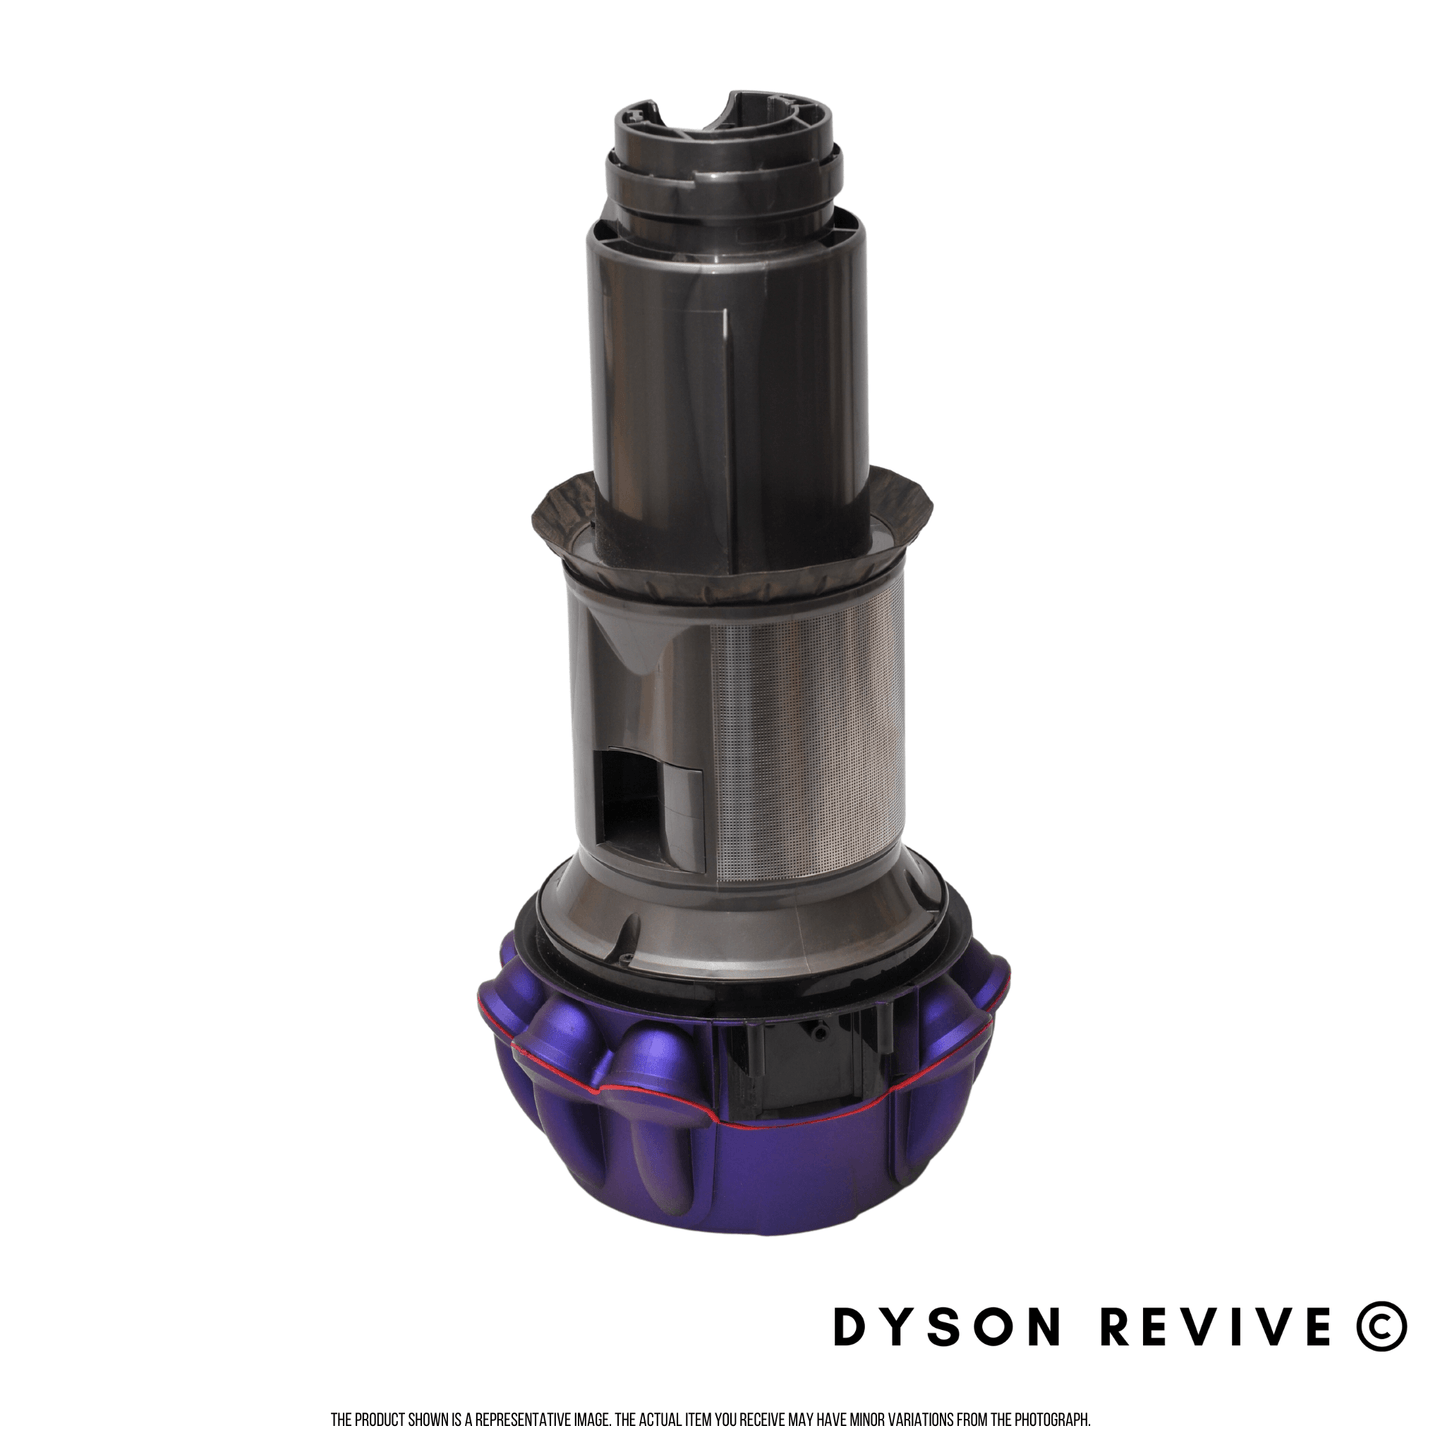 Genuine Refurbished Dyson V10 Cyclone Only - Dyson Revive